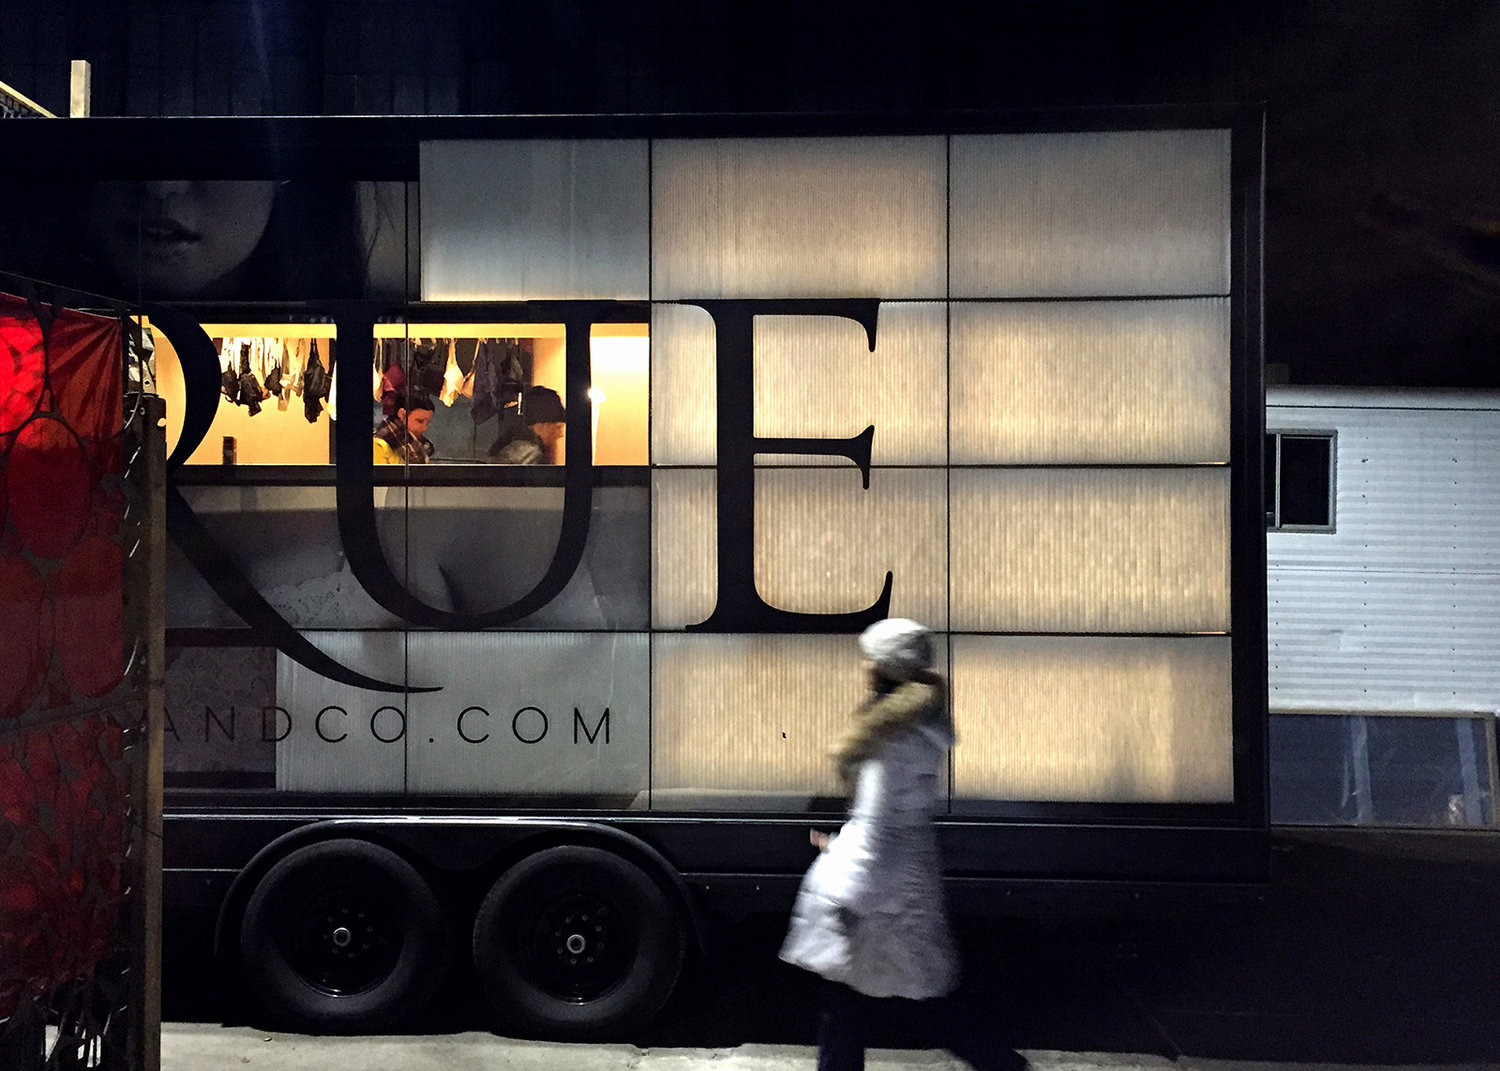 True co. Mobile lingerie shop by saw and MOA will Travel across the us.